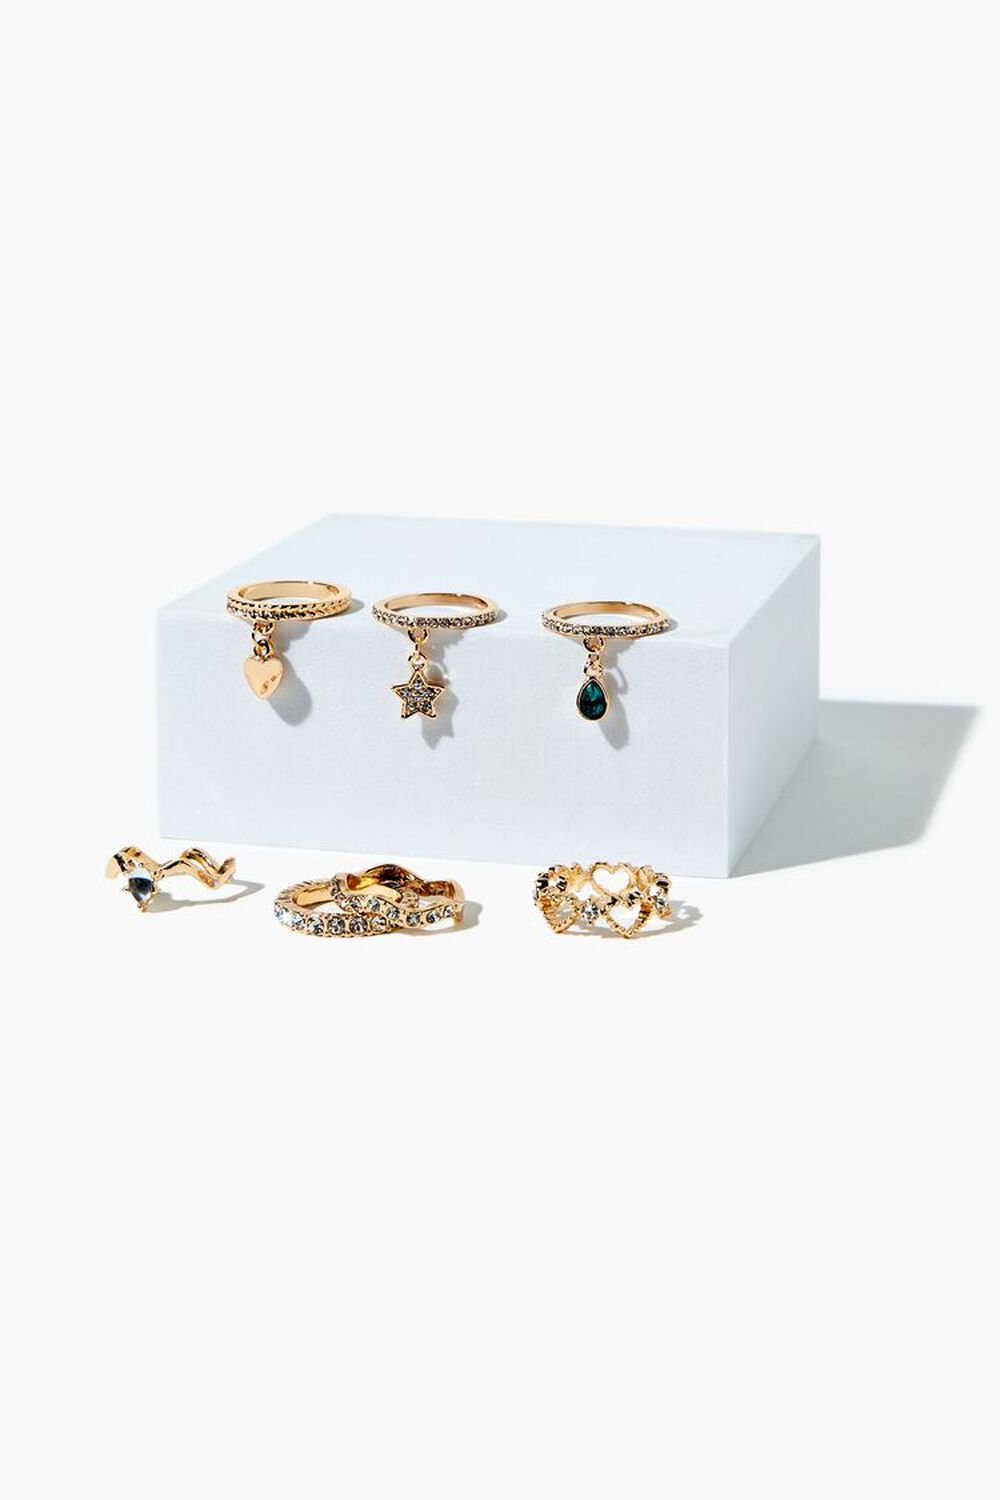 GOLD/CLEAR Assorted Rhinestone & Charm Ring Set, image 2